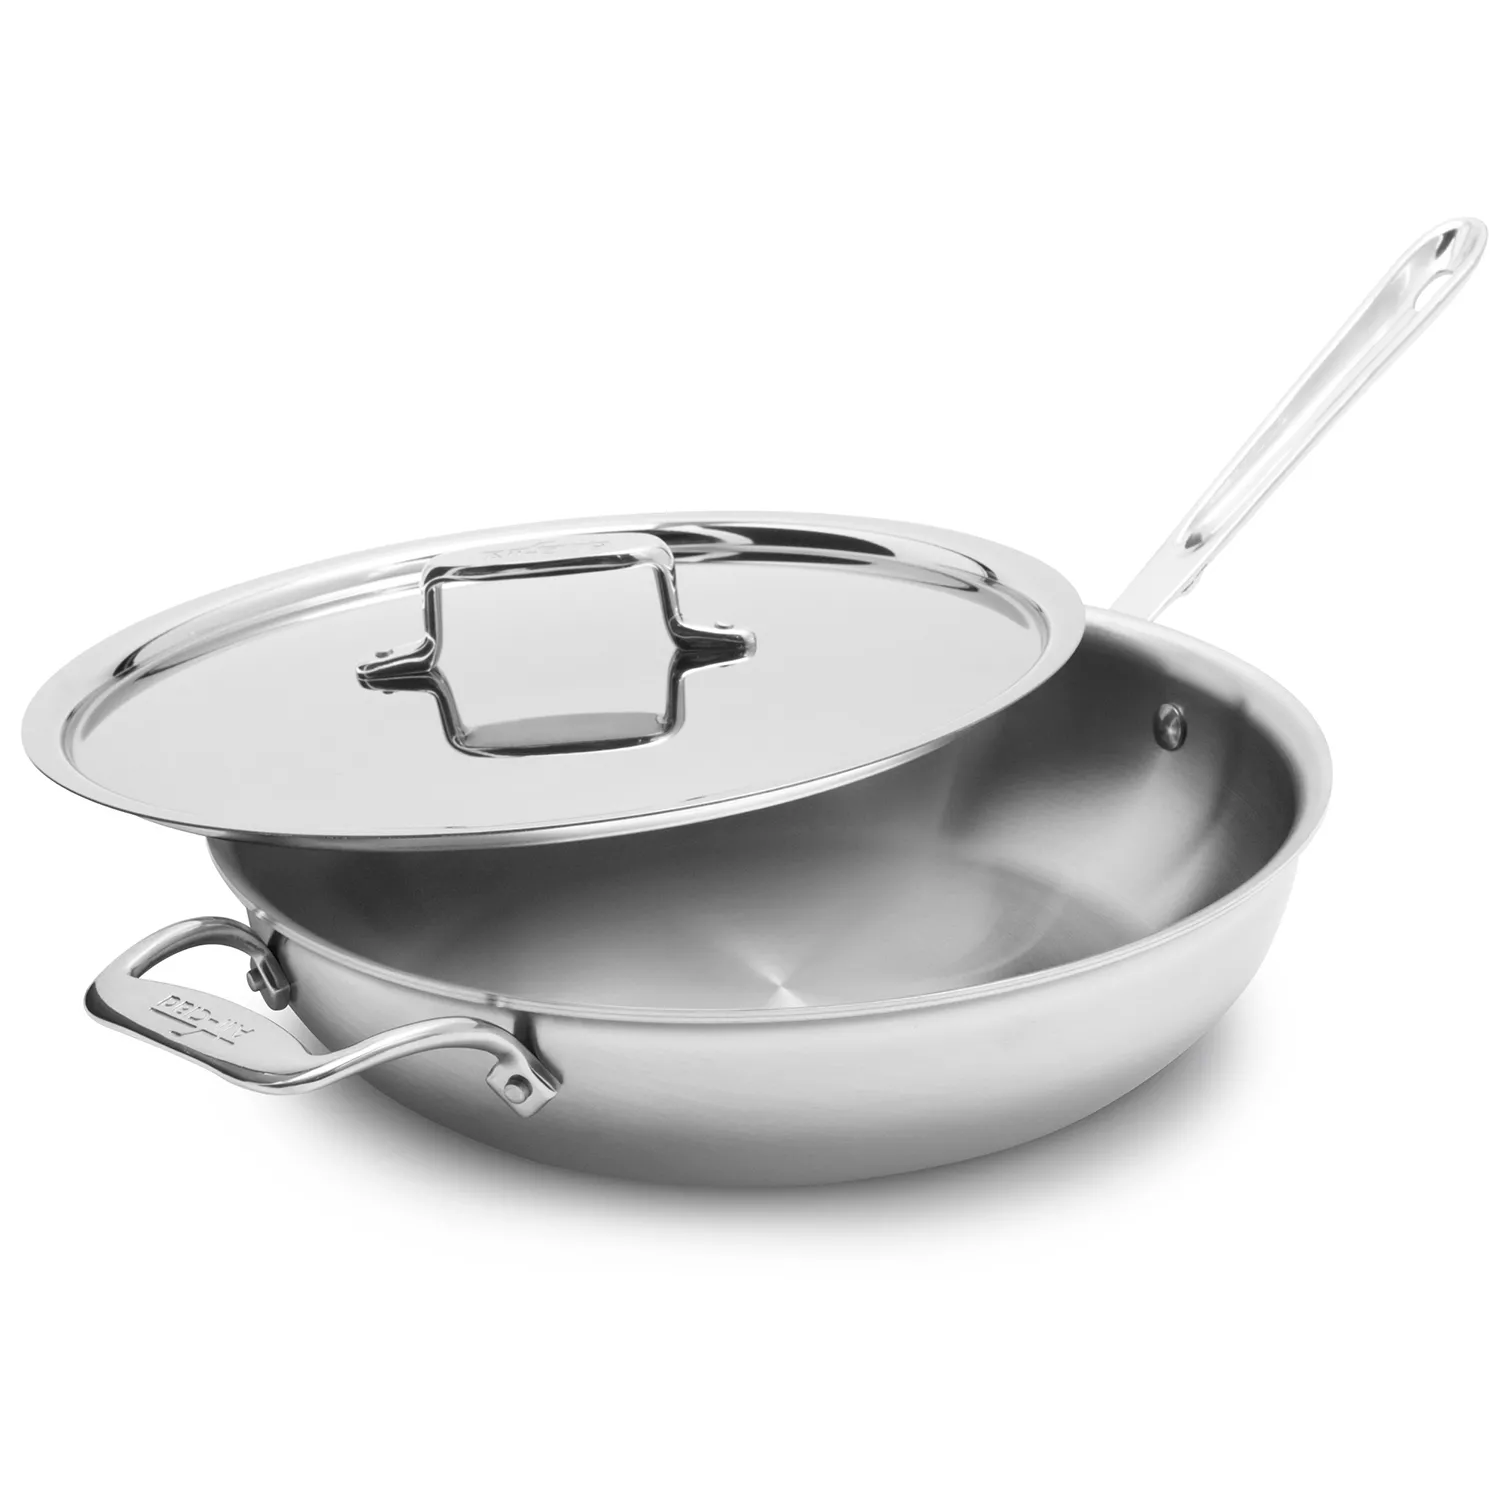 All-Clad Stainless Steel 4-Qt Weeknight Pan with Lid 